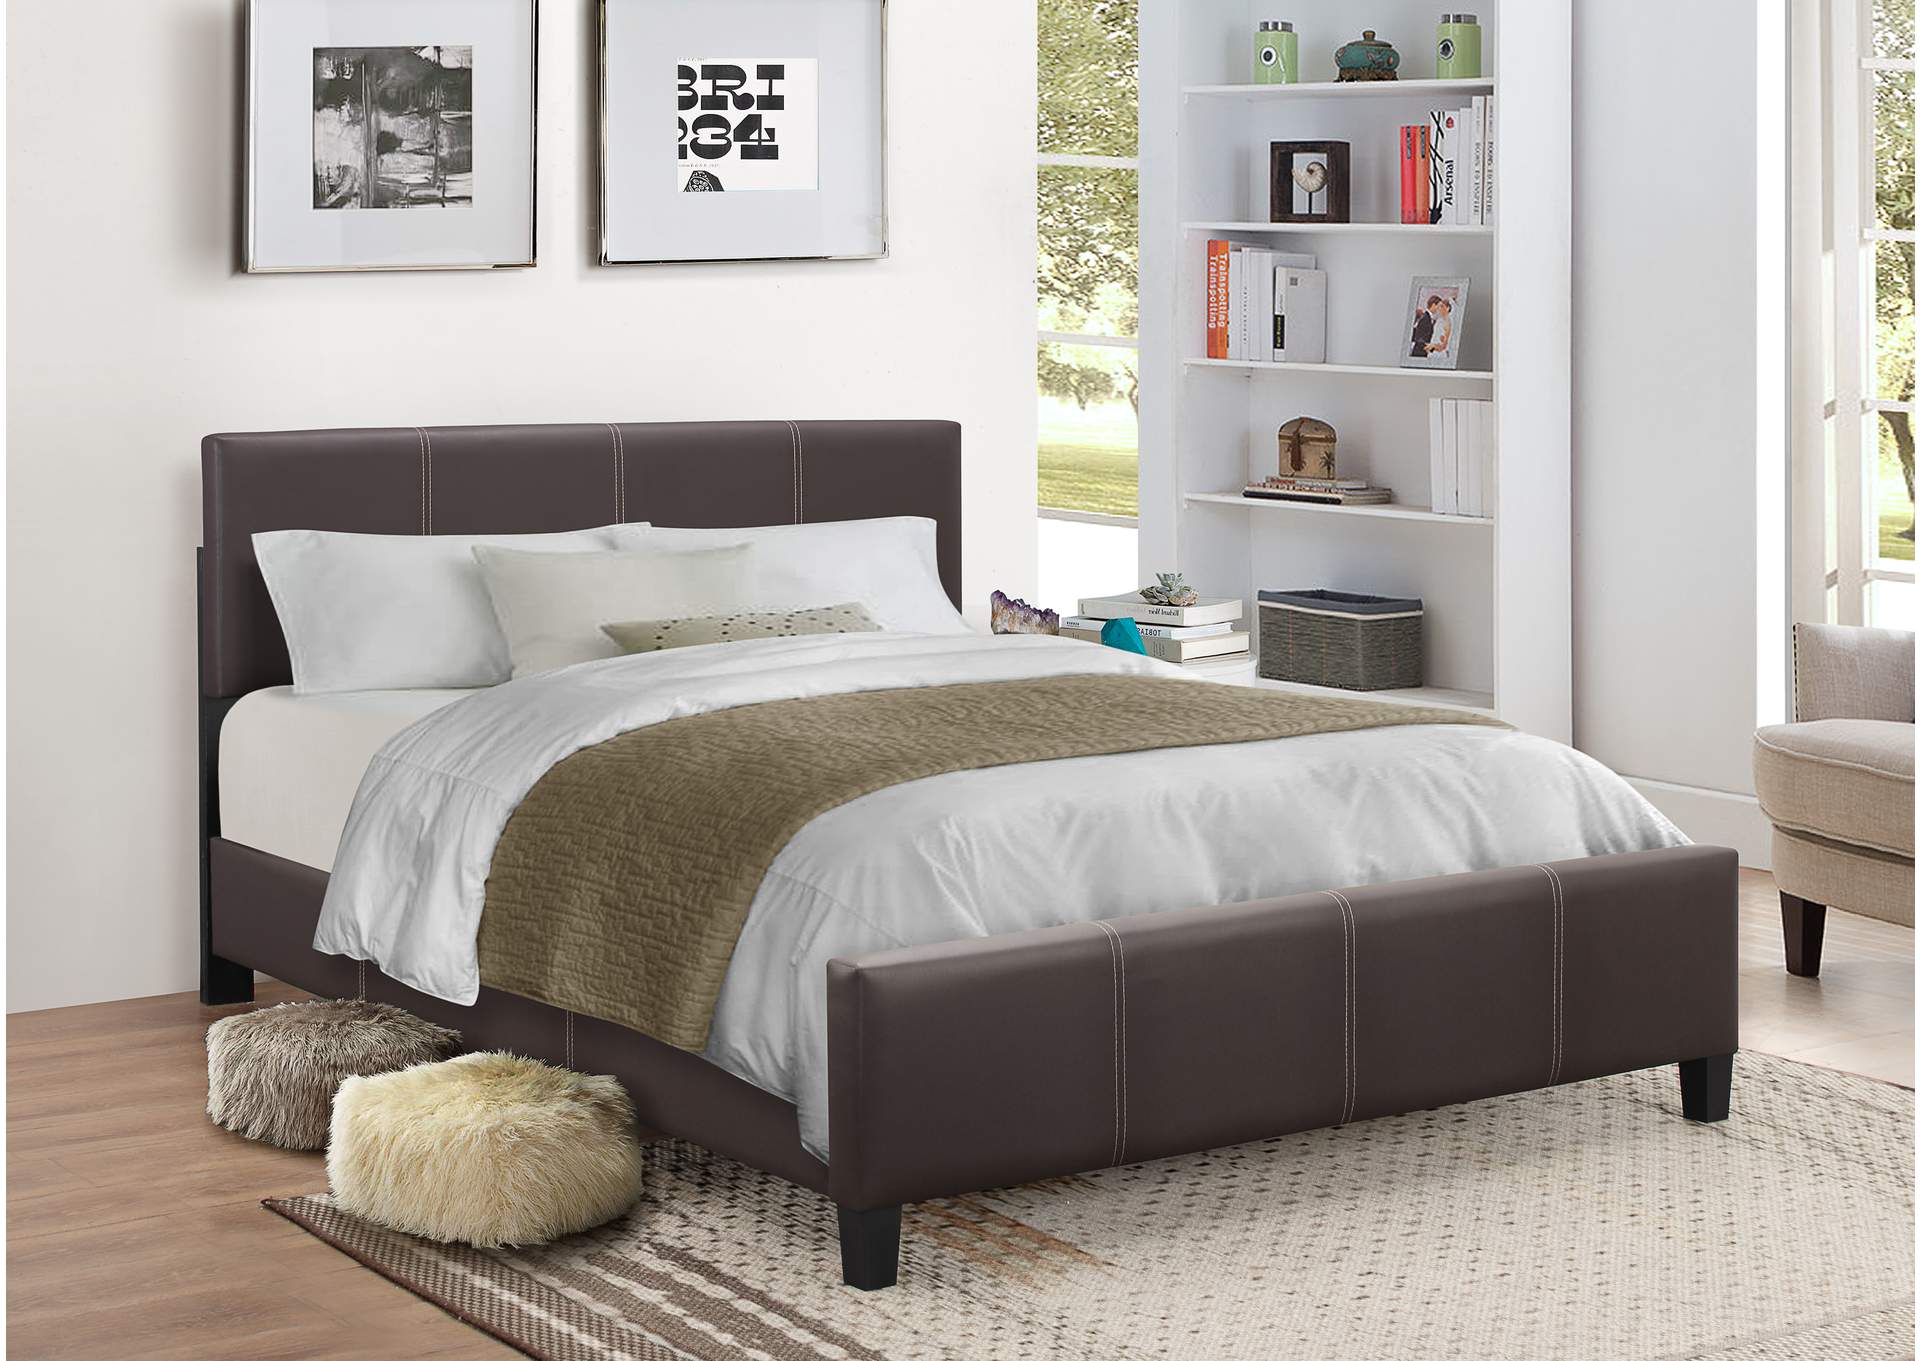 Brown Twin Bed,Global Trading